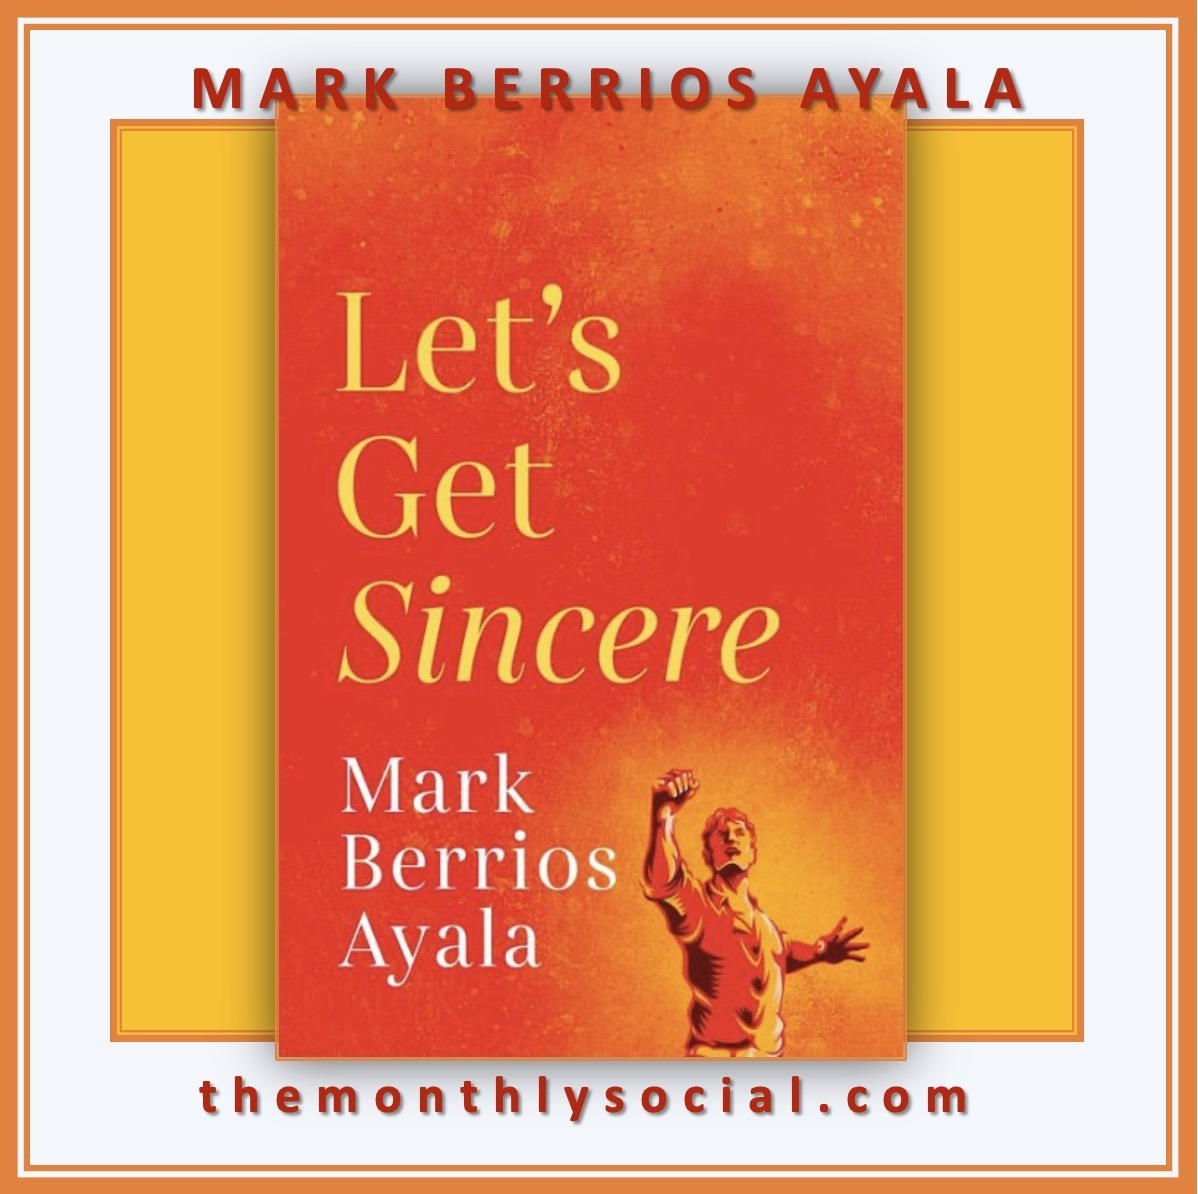 Book: Let's Get Sincere, Allyship by Mark Berrios Ayala